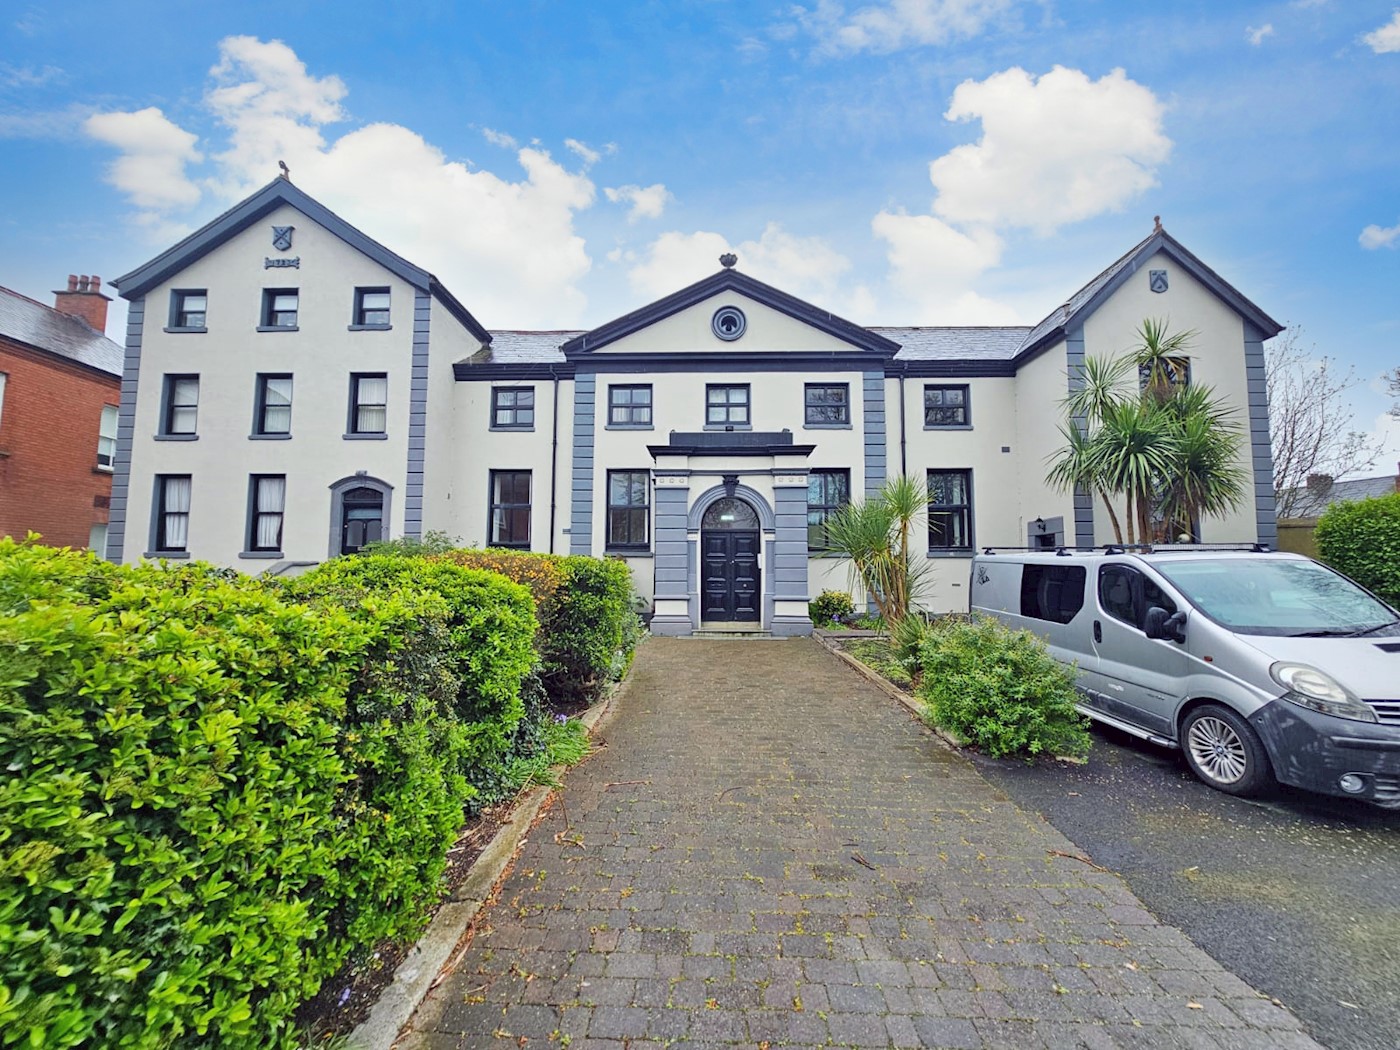 Apartment 9 Old Library Chapel Street, Dundalk, Co. Louth, A91 H573 1/2